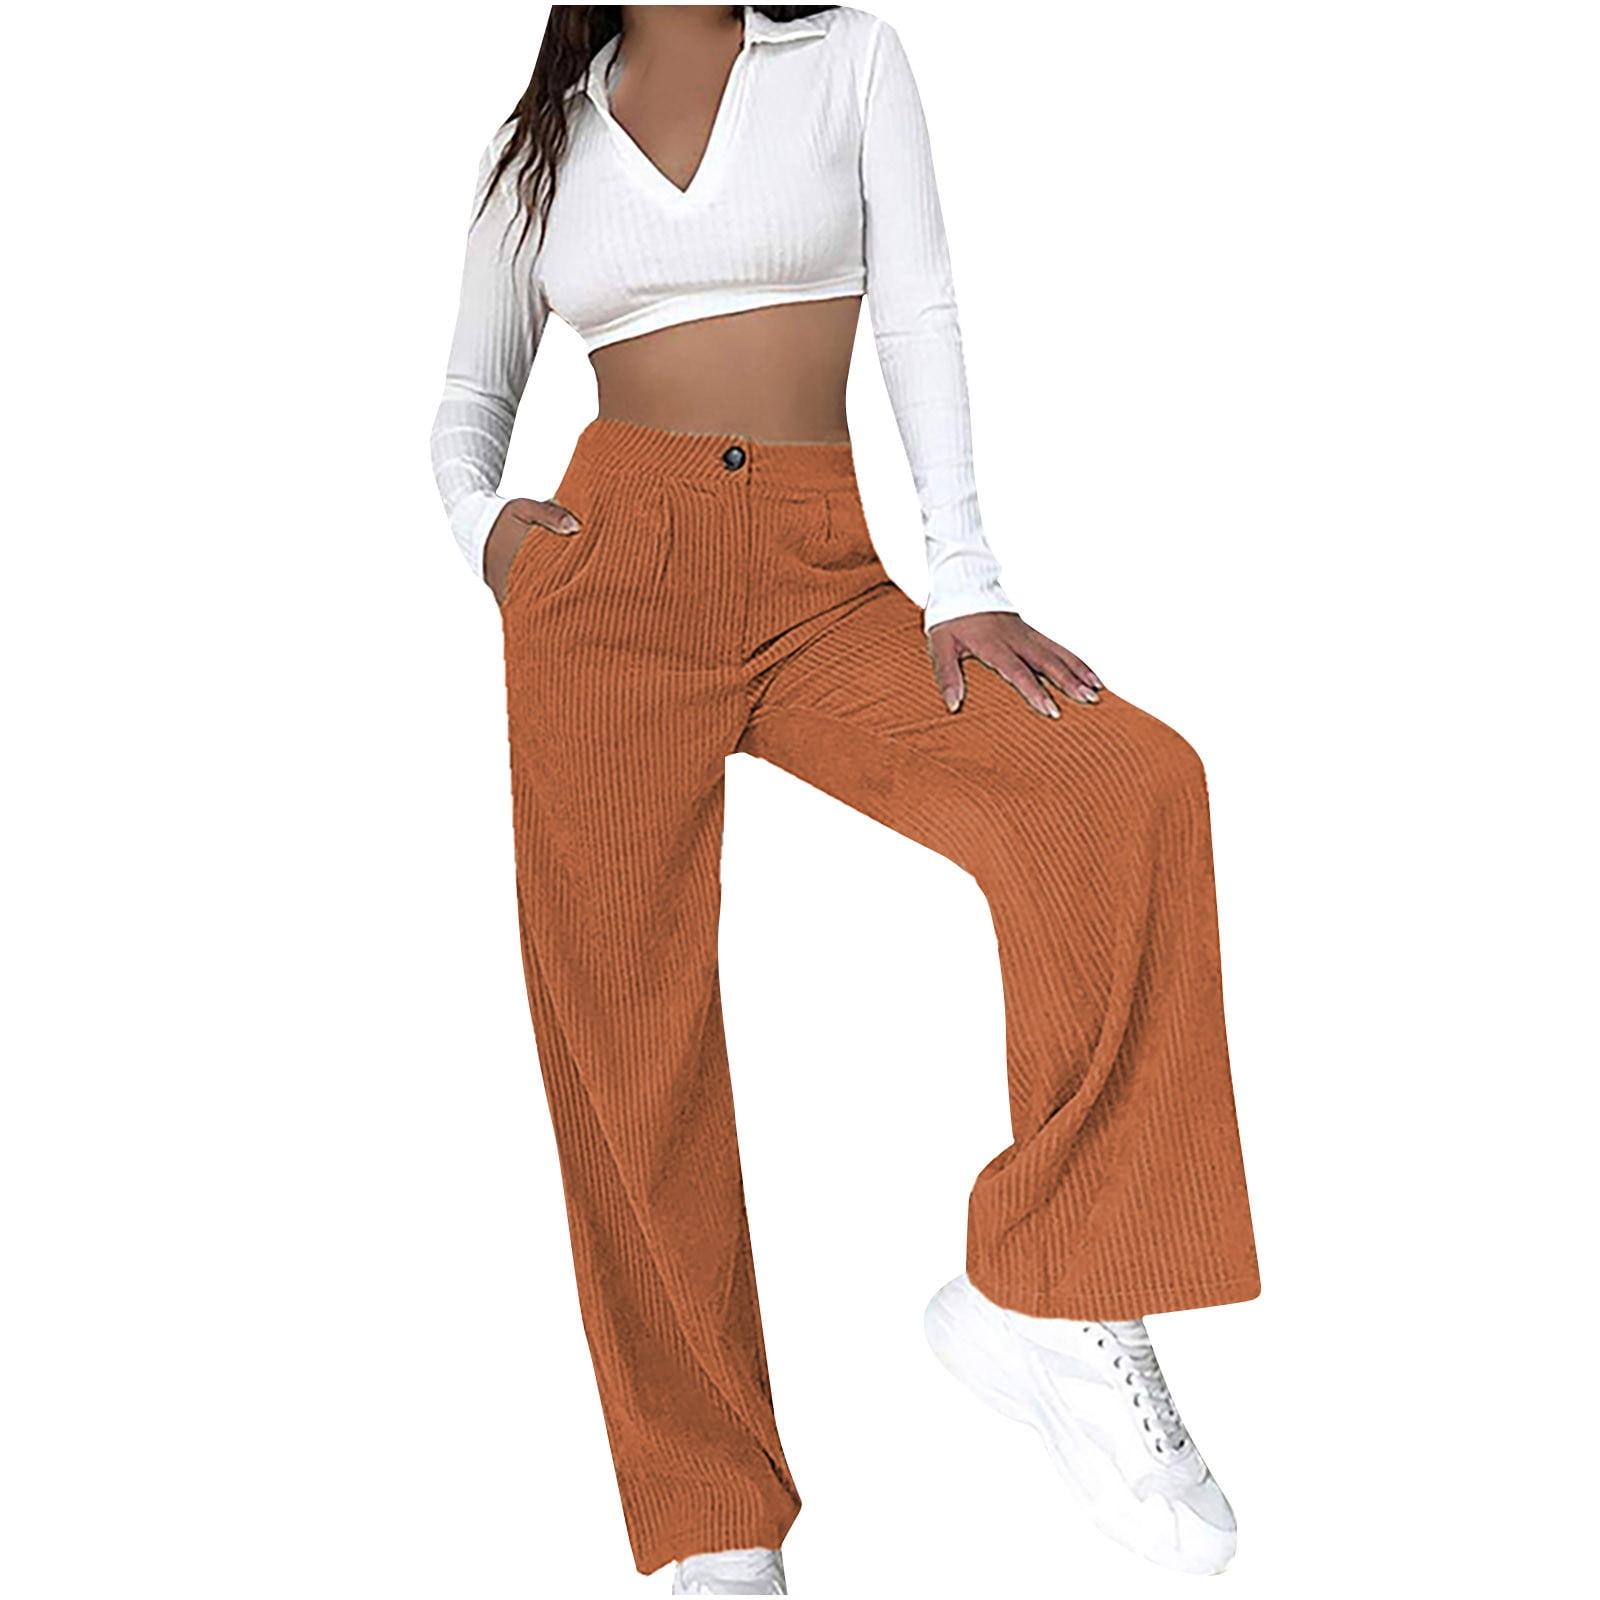 RQYYD Women's High Waist Corduroy Pants Solid Wide Leg Workout Trousers  with Pocket Orange M